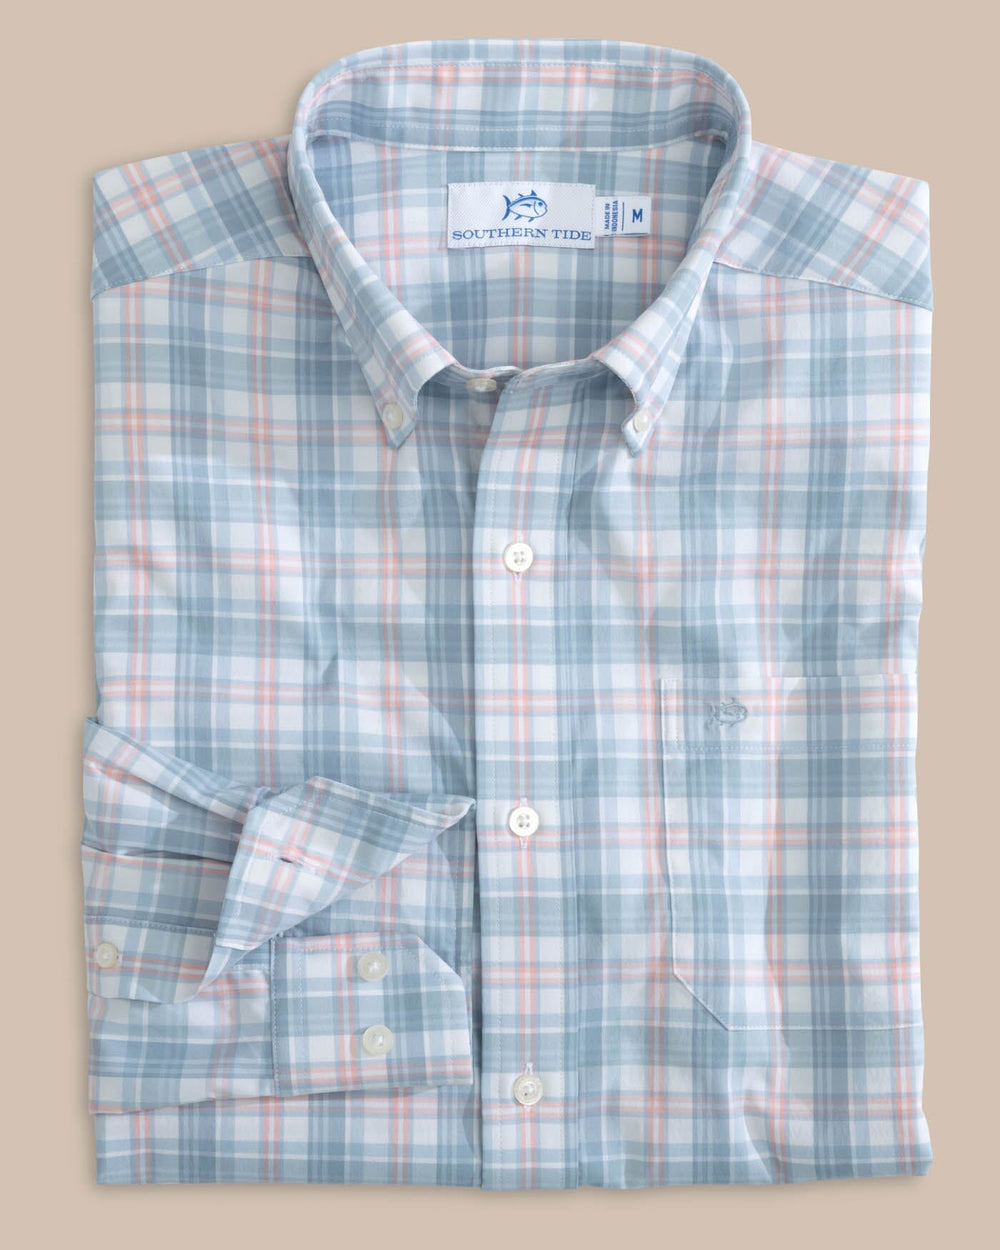 The front view of the Southern Tide Intercoastal West End Plaid Long Sleeve Sport Shirt by Southern Tide - Subdued Blue